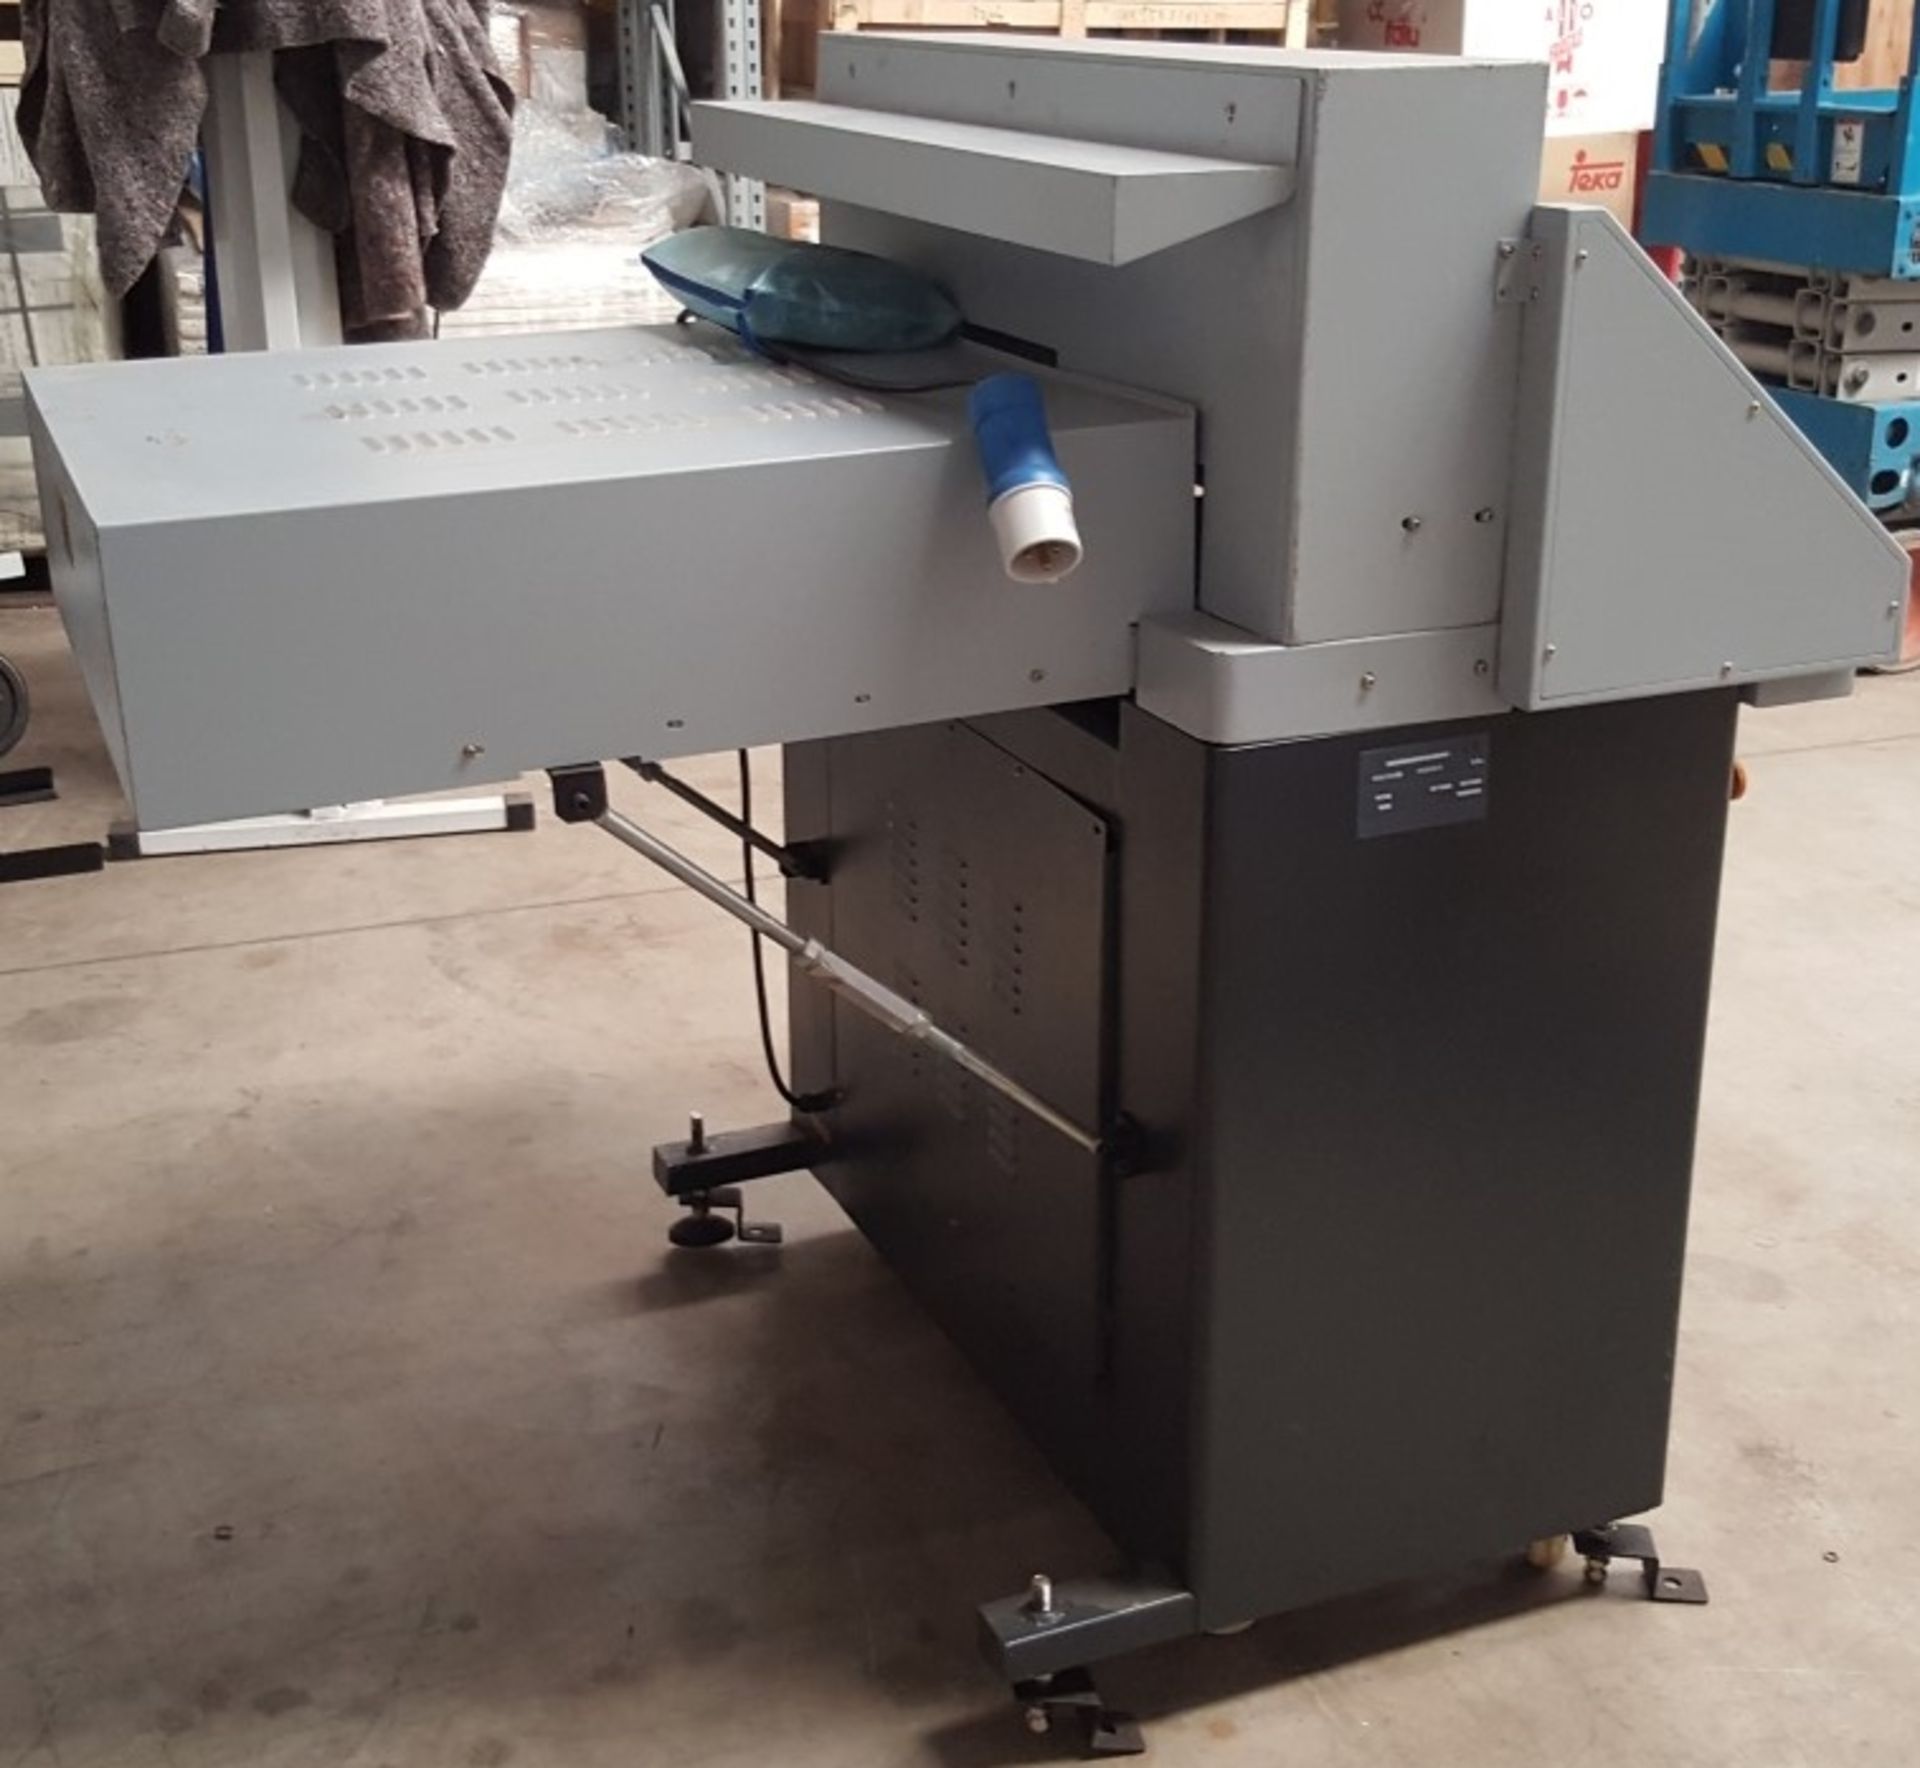 1 x Docon DC-8670HP Hydraulic Paper Guillotine - Heavy Duty Paper Cutting Machine - Image 5 of 10